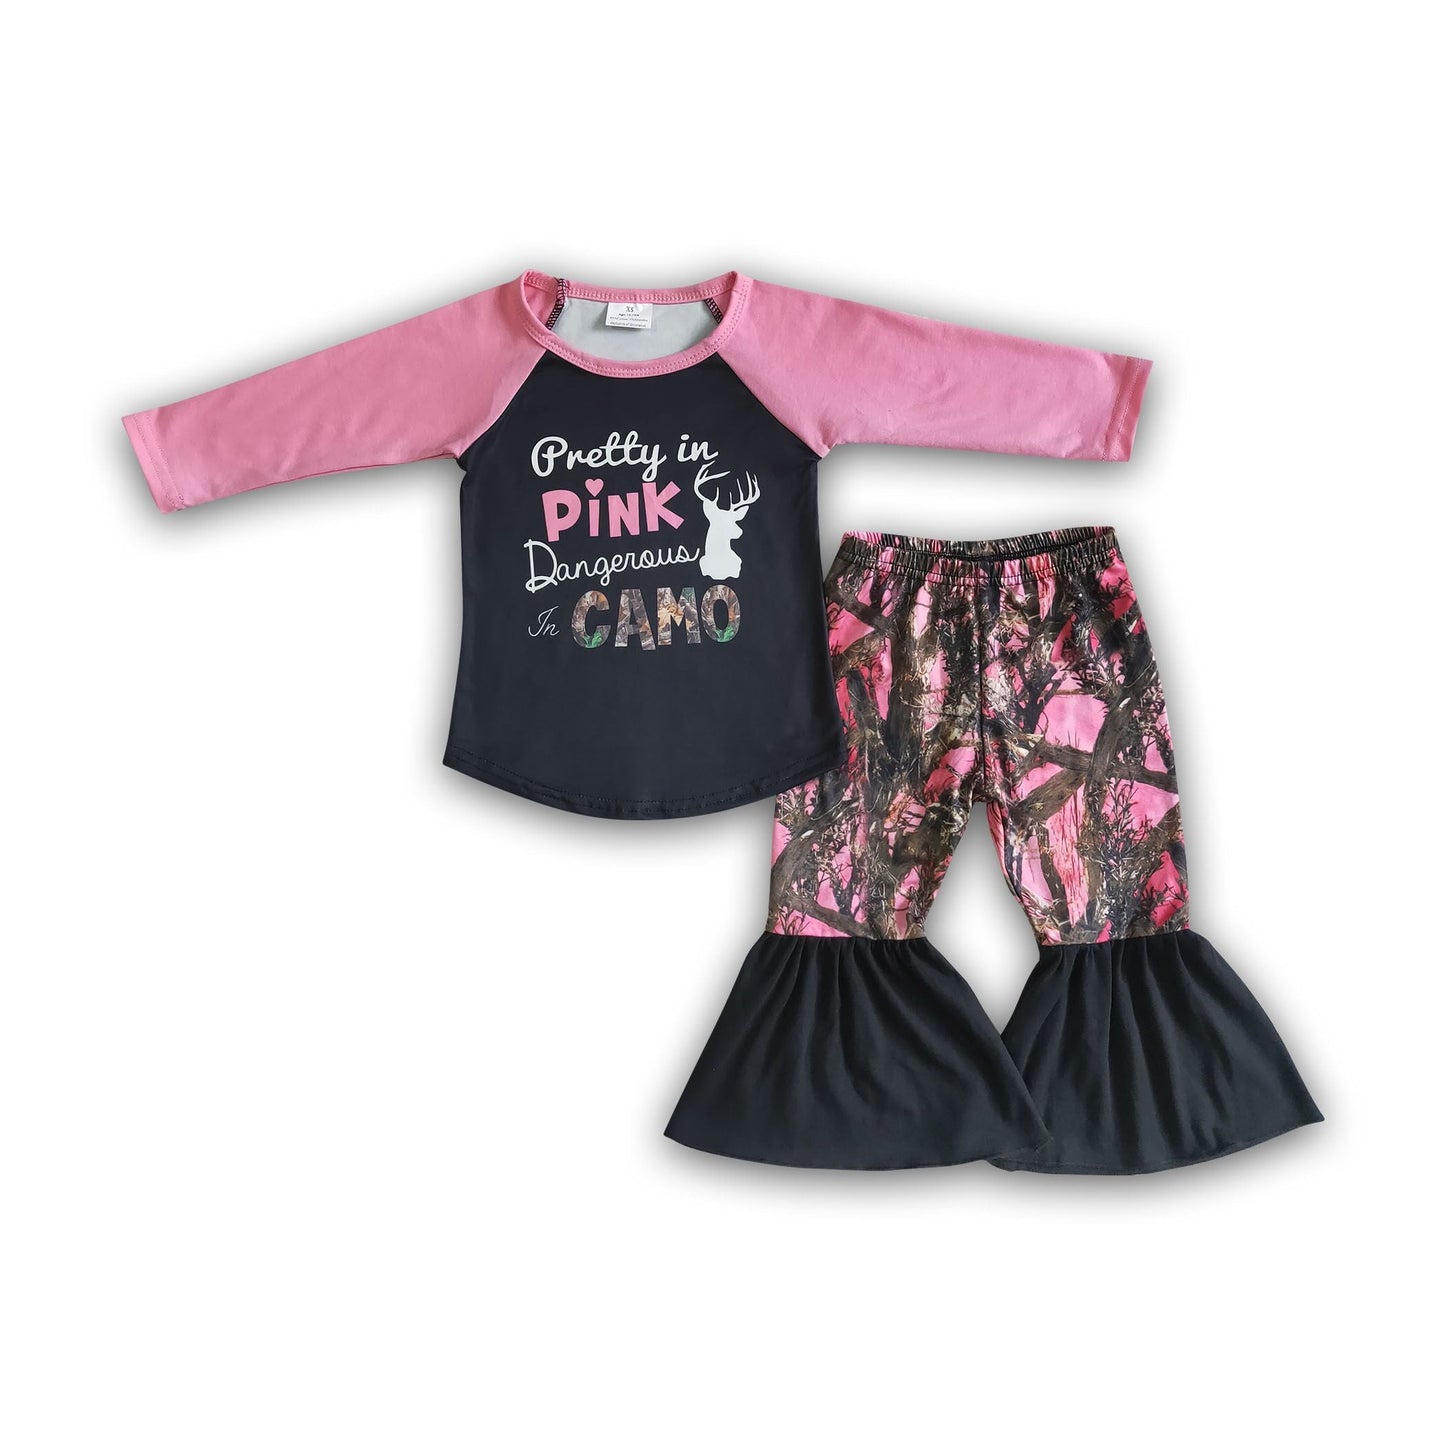 pink camo bell bottom pants girls fall outfits